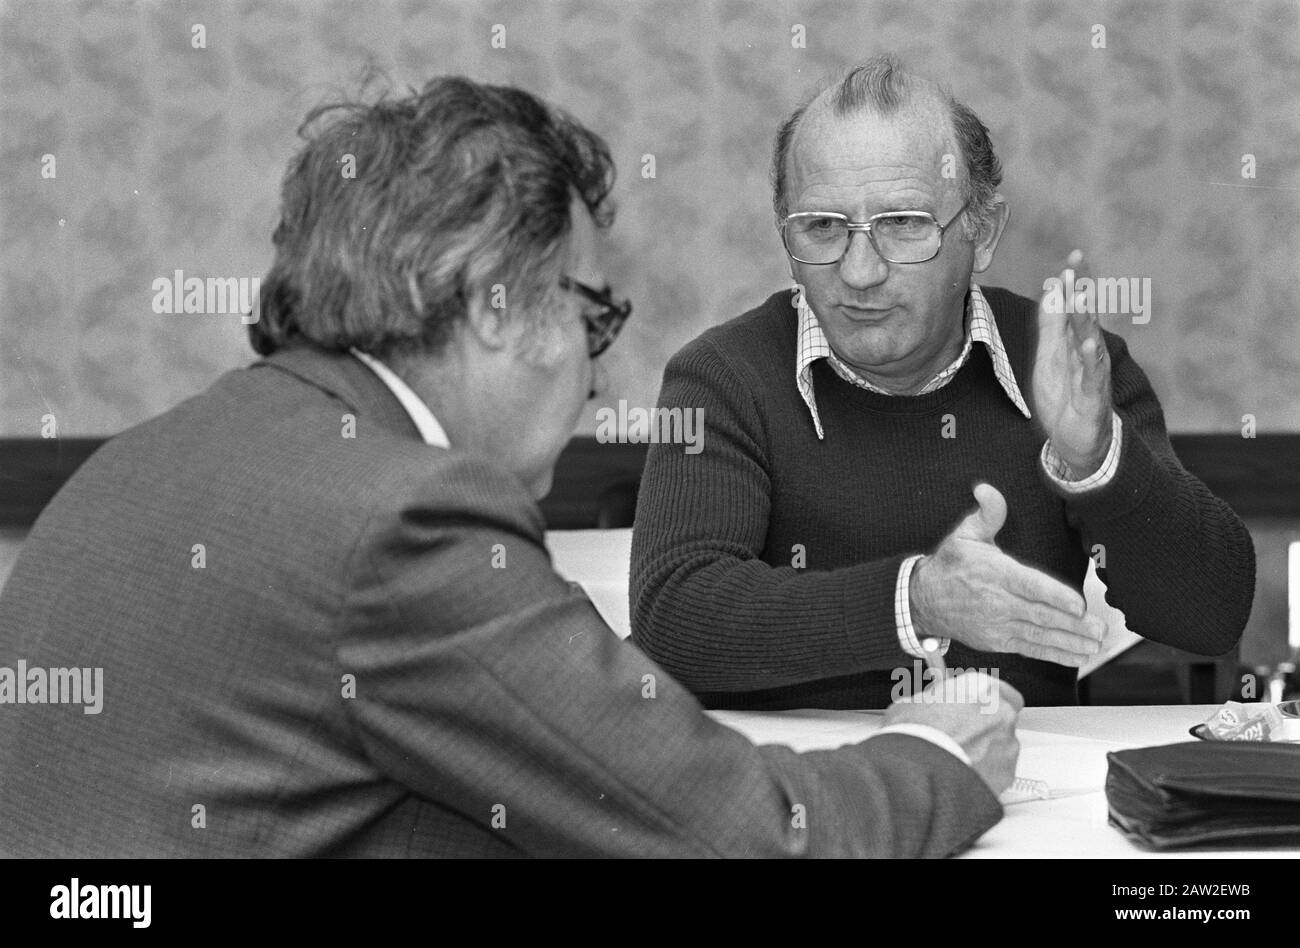 Press Conference PSV i.v.m. game against St. Etienne (eighth European Cup final); PSV coach Rijvers speaking Date: November 1, 1976 Location: Eindhoven Keywords: press conferences, sports, coaches, soccer, sports Person Name: Rijvers, Kees Stock Photo